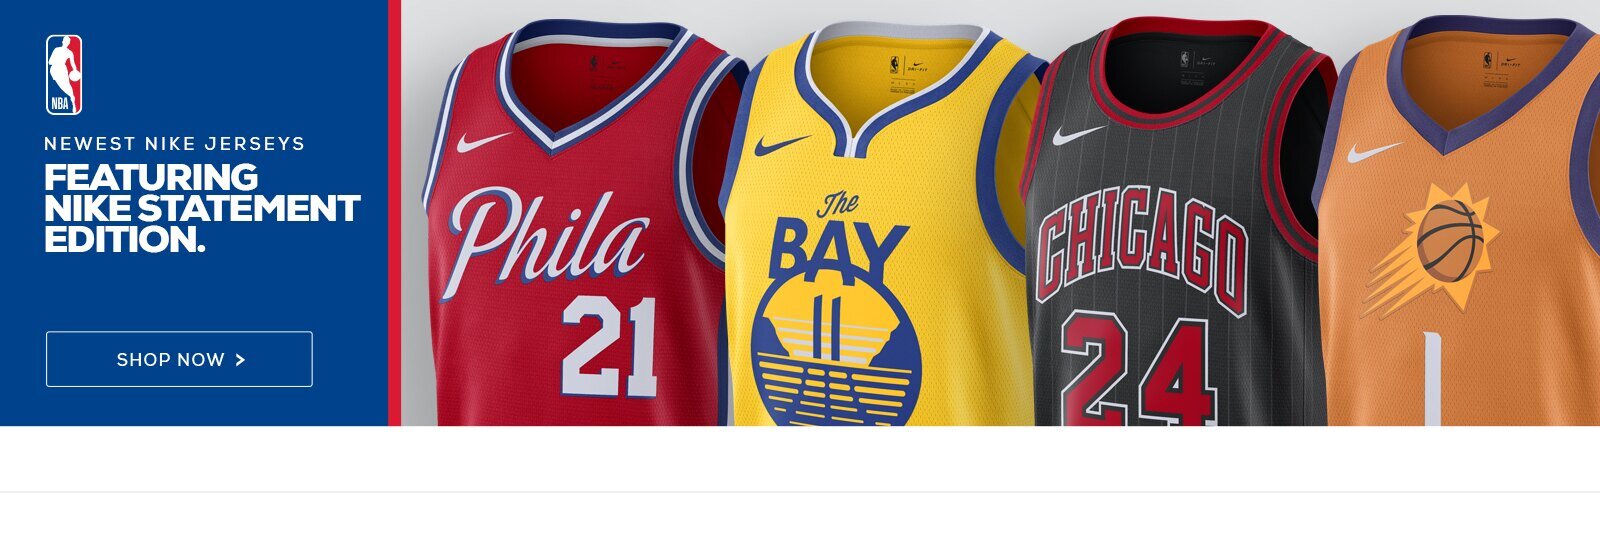 rockets throwback jersey 2019